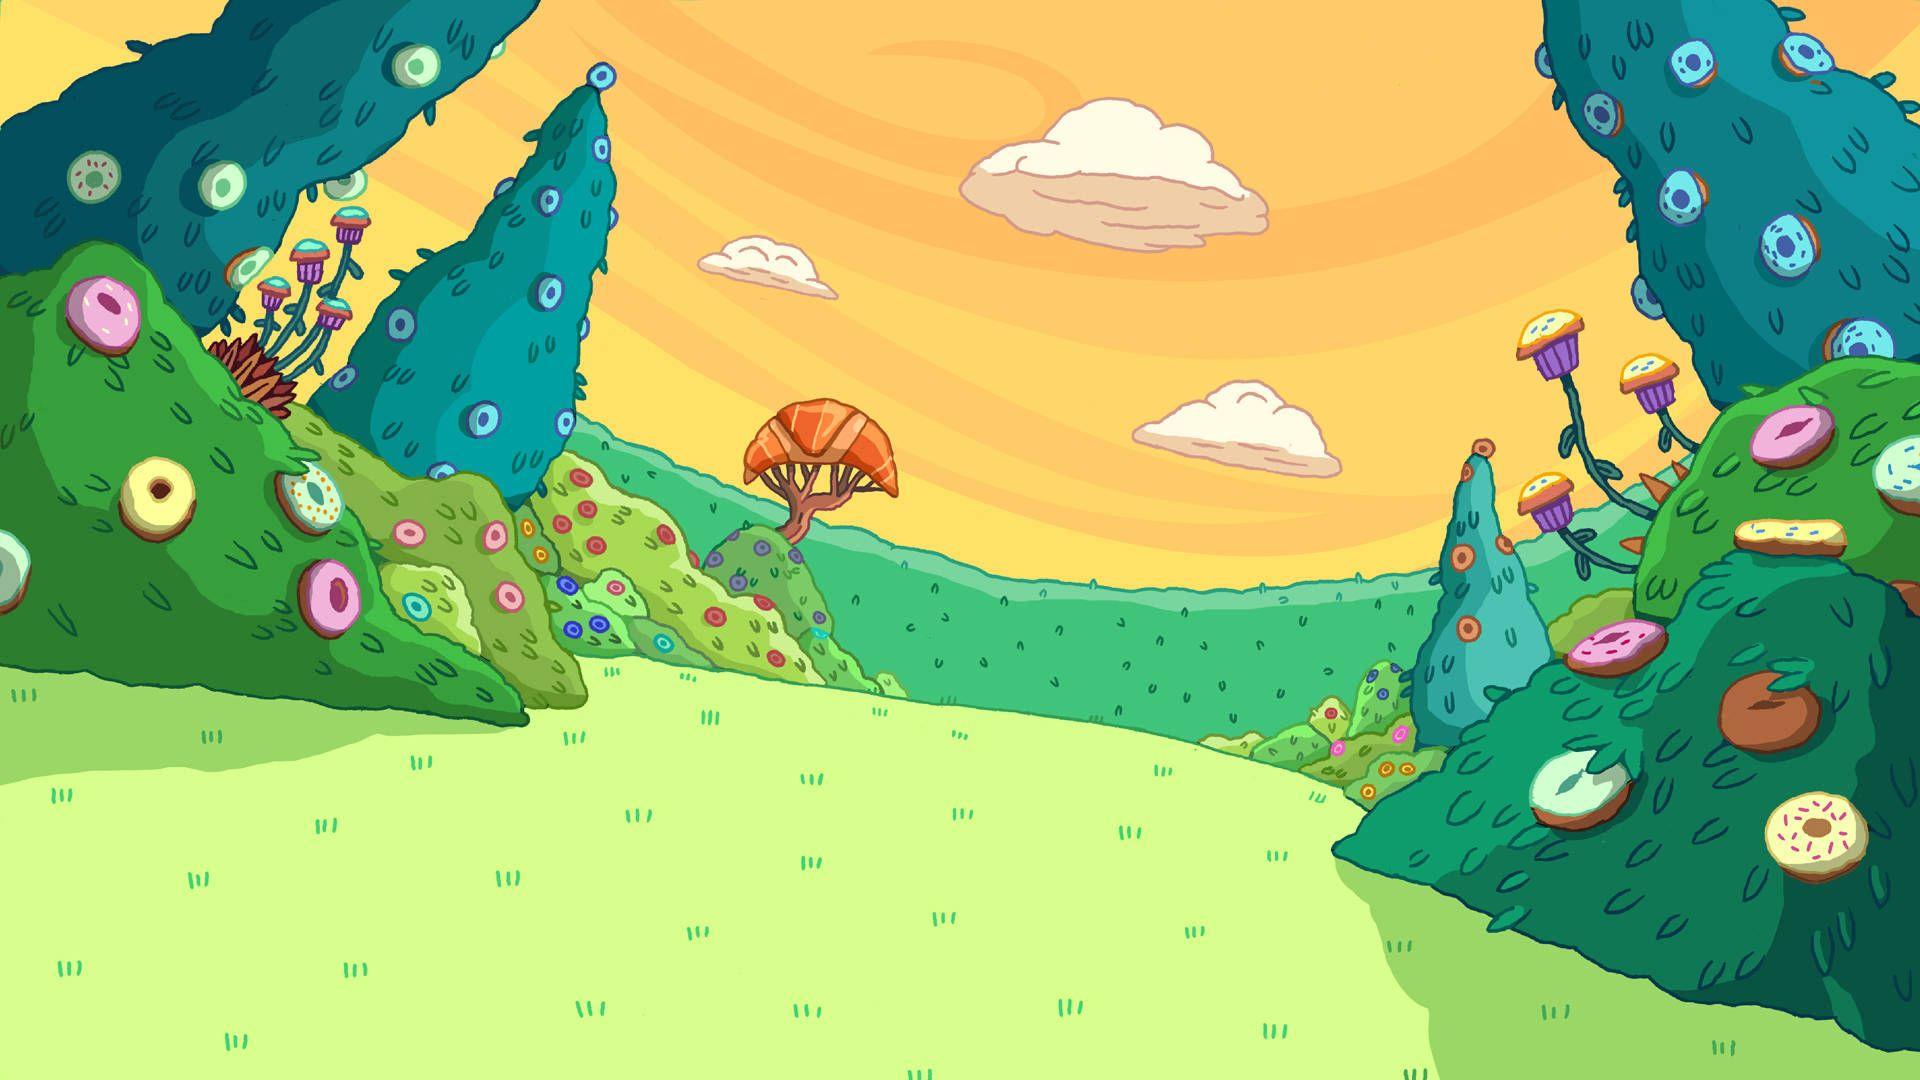 Adventure Time background with a sky background, clouds, trees, donuts, and mushrooms. - Adventure Time